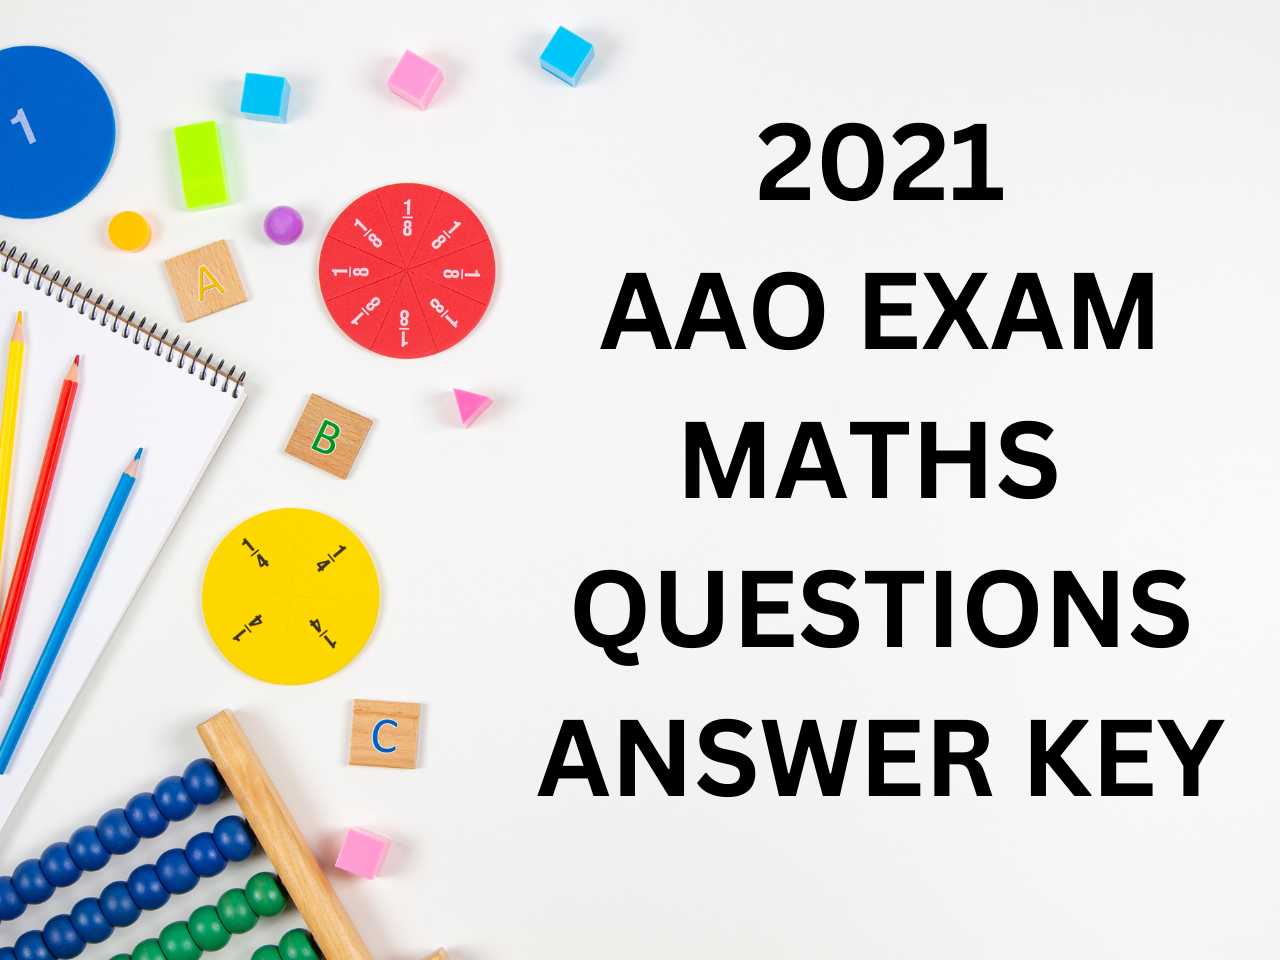 2021 AAO EXAM MATHS QUESTIONS ANSWER KEY